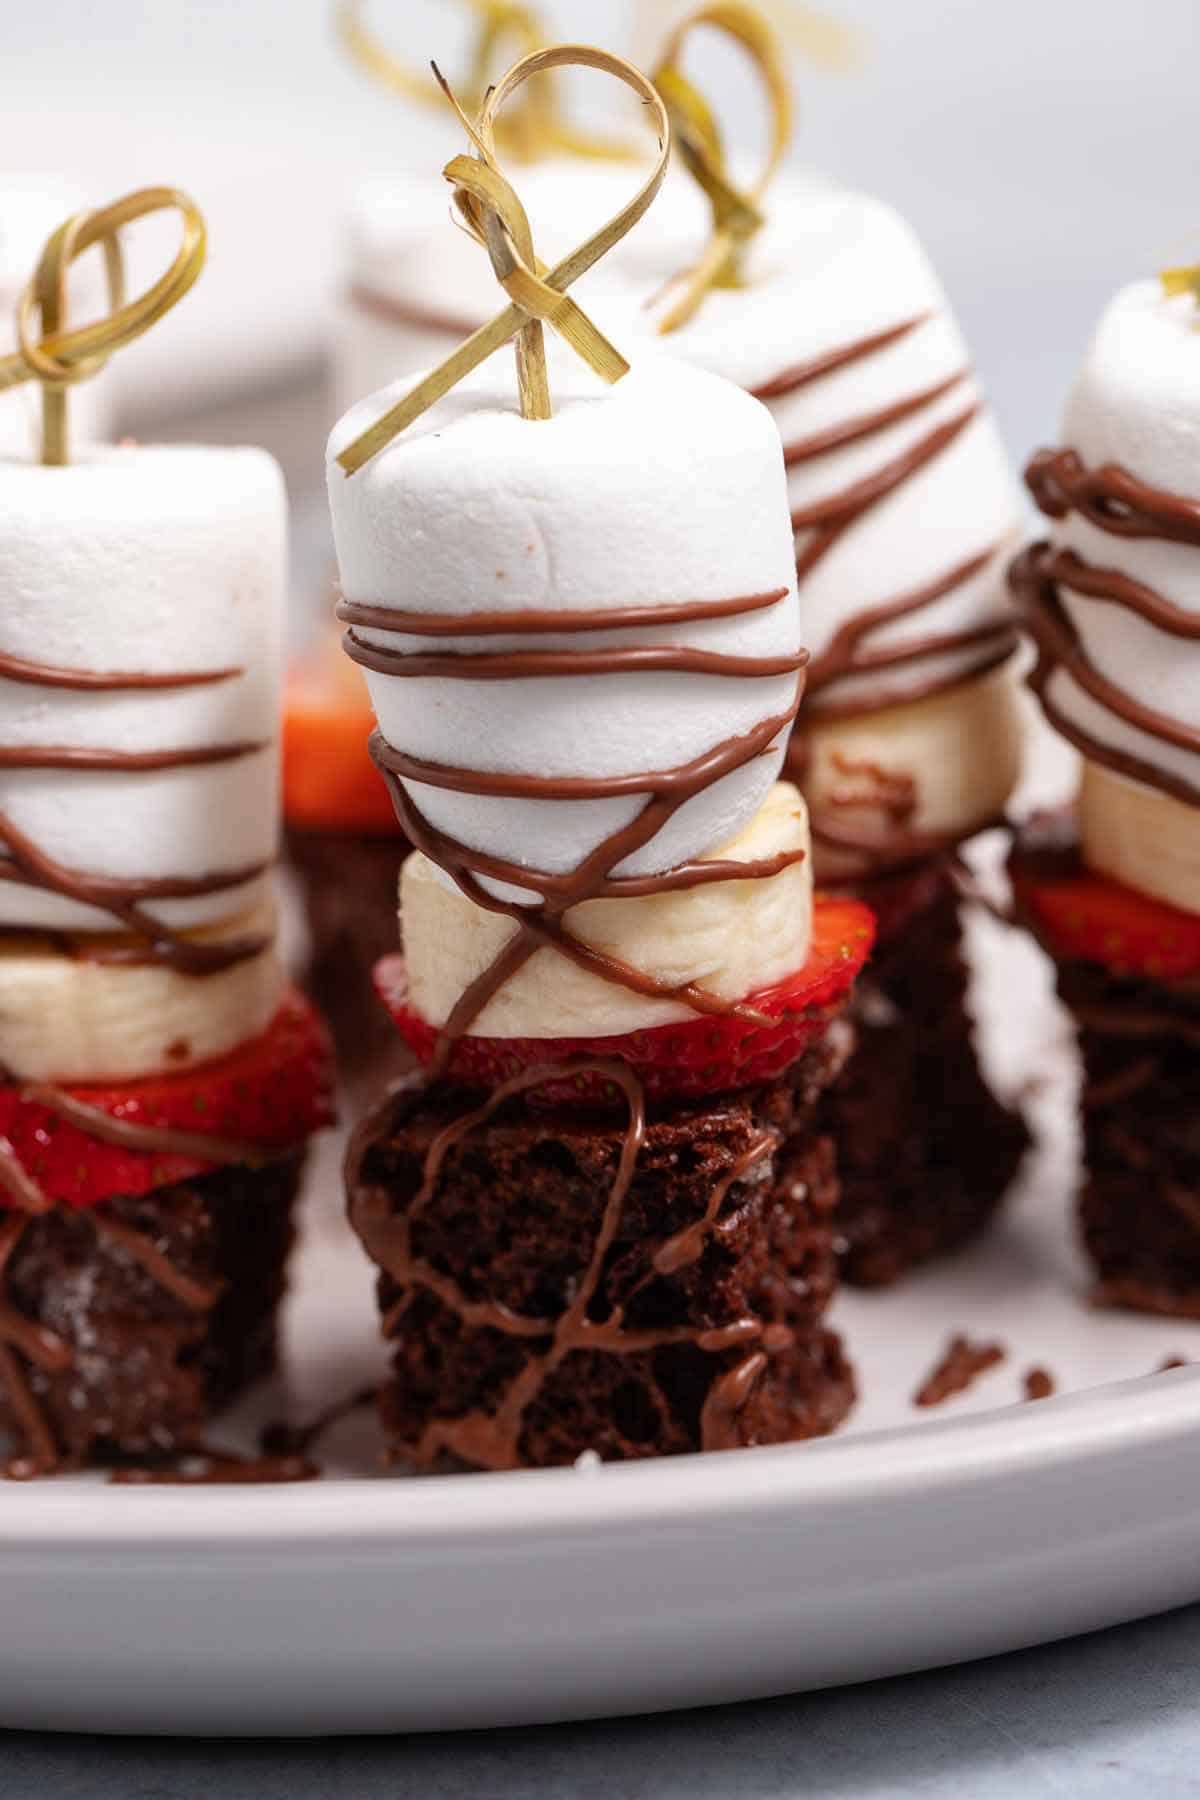 Plate of dessert skewers with a giant marshmallow, banana, strawberry, and chocolate cake croutons.